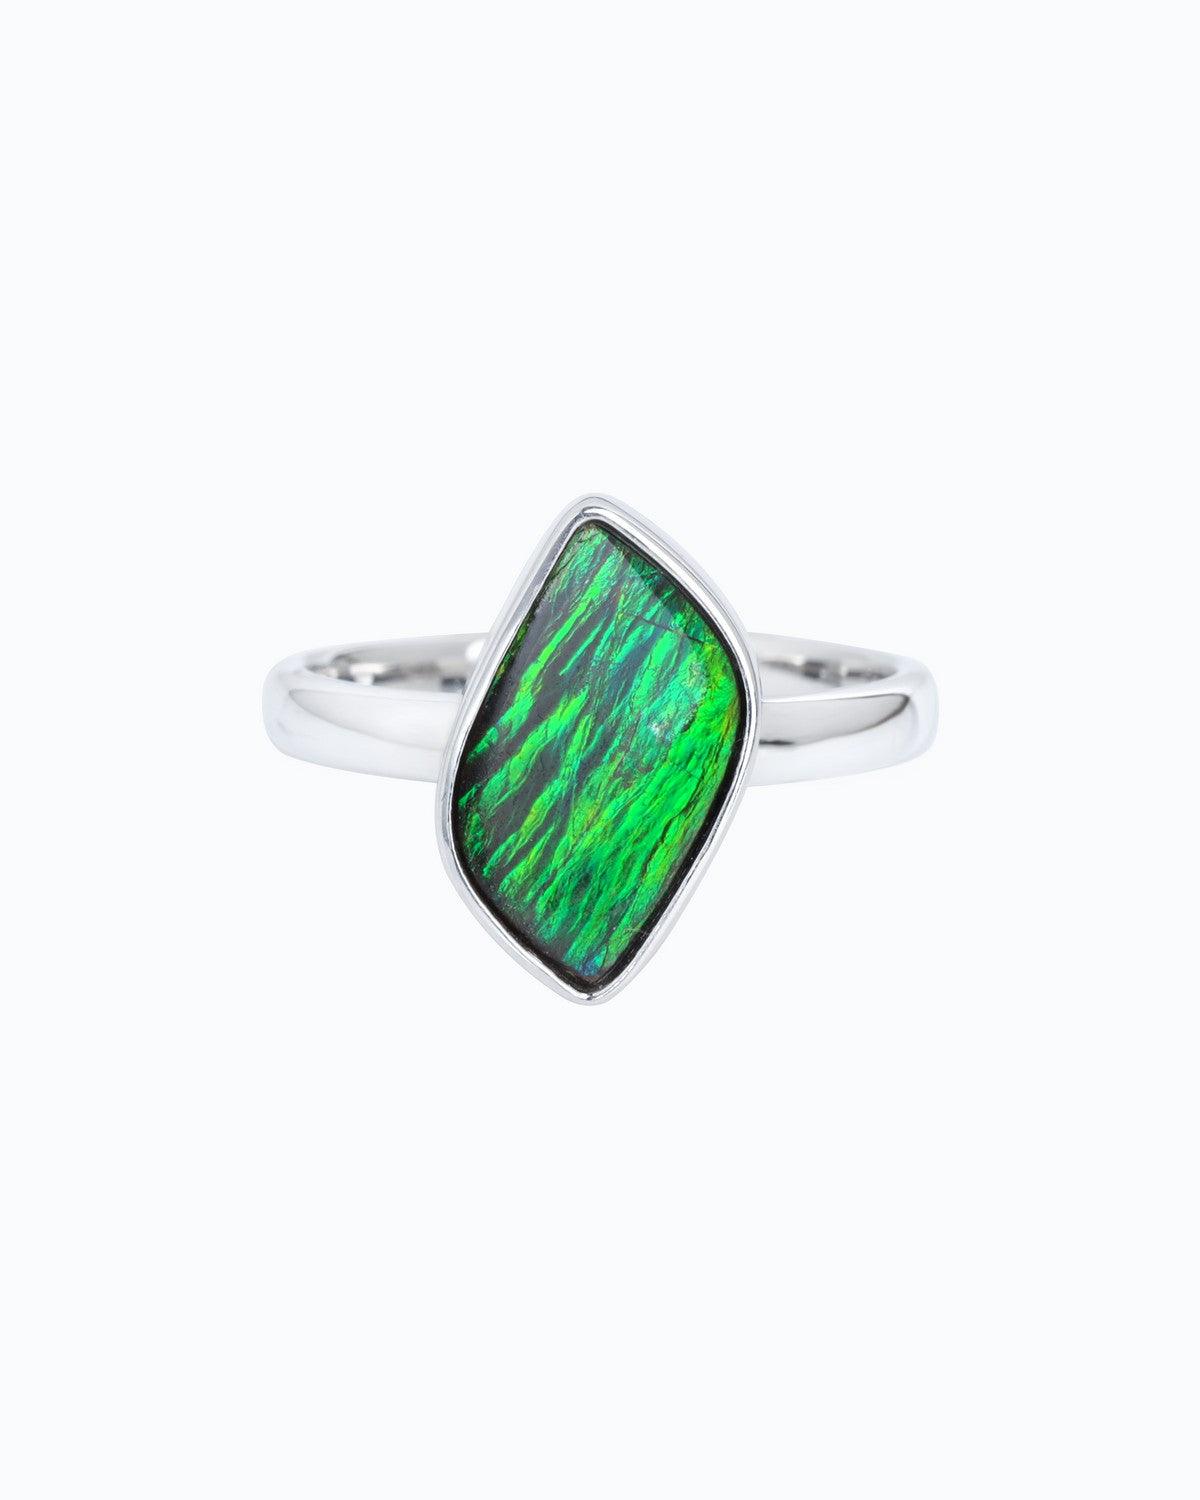 4.15 Ct. Ammolite Ring Solid 925 Sterling Silver Jewelry - YoTreasure